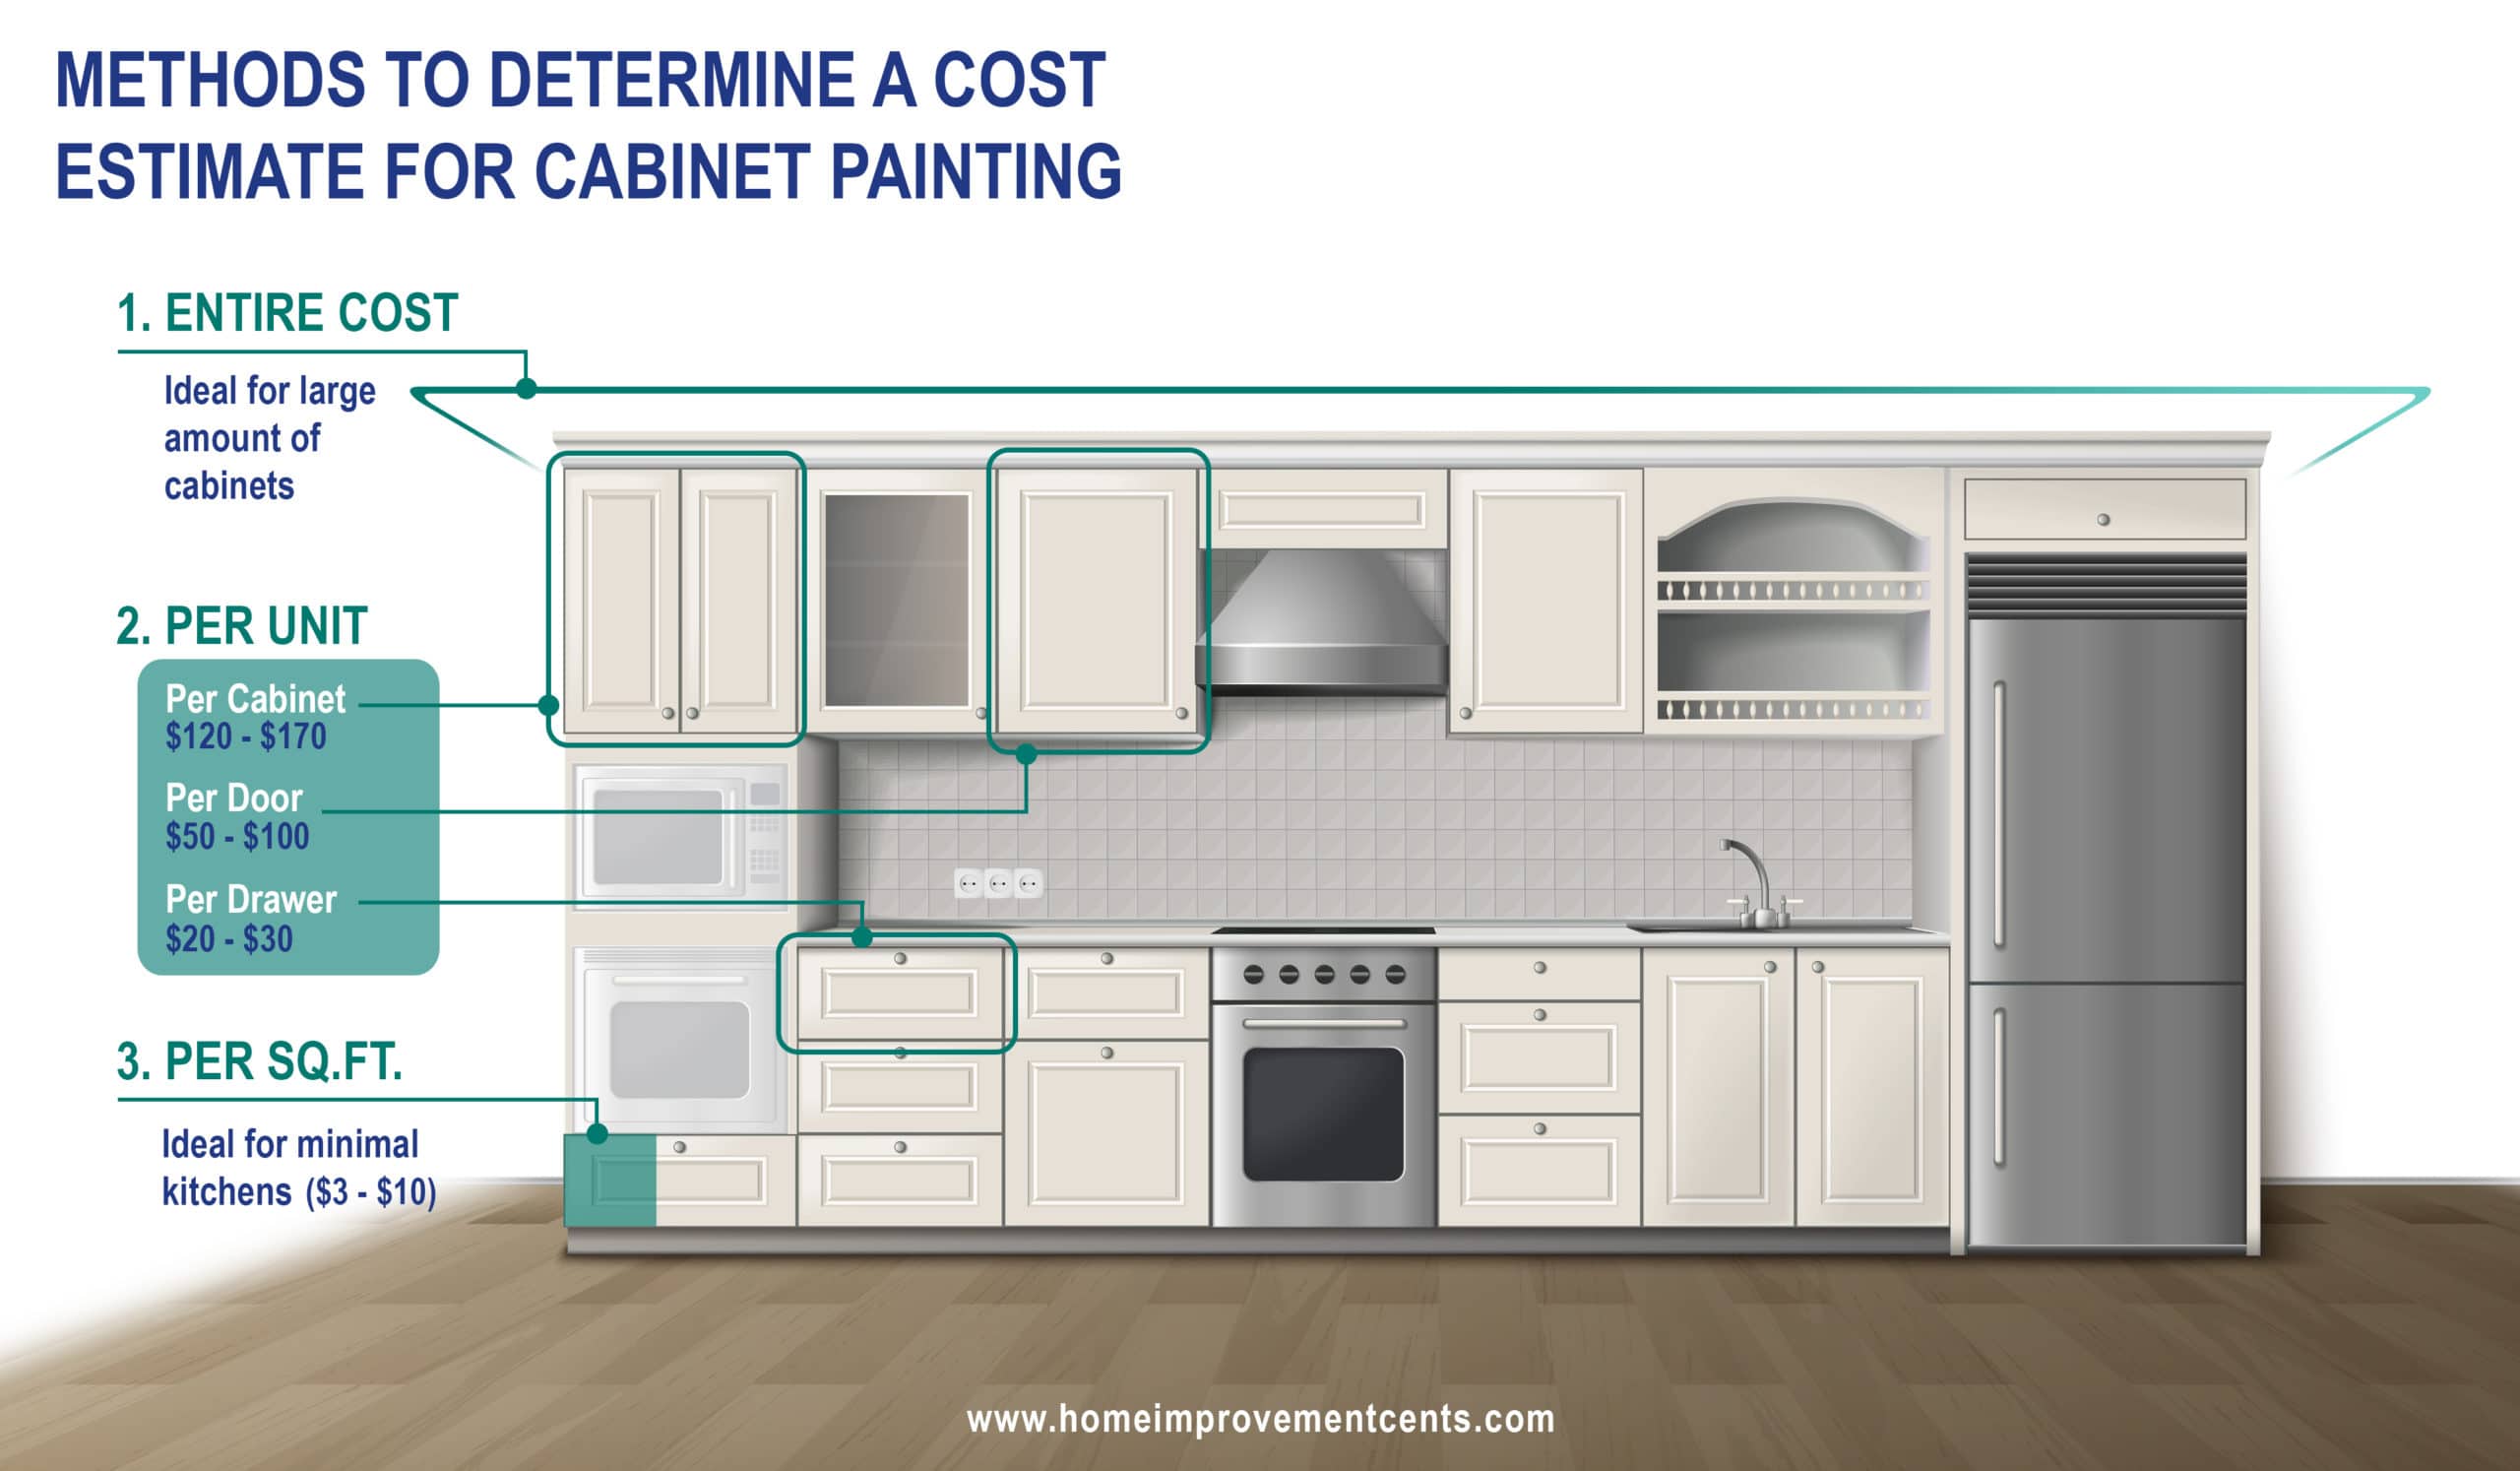 Graphic showing the cost of cabinet painting per cabinet and per square foot